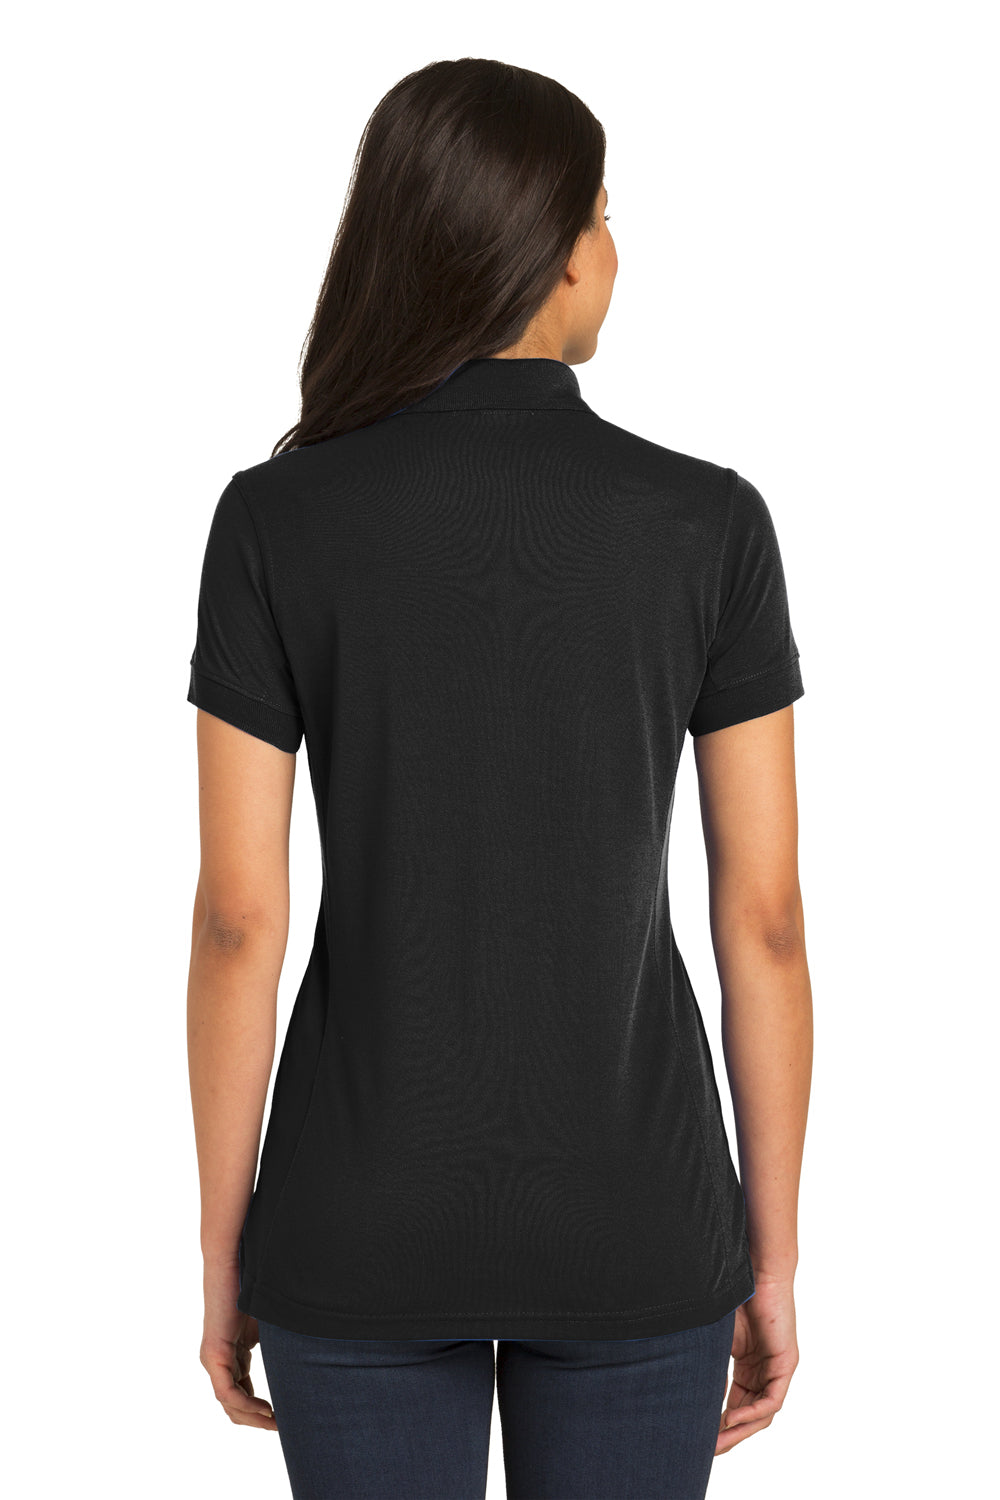 Port Authority L567 Womens 5-in-1 Performance Moisture Wicking Short Sleeve Polo Shirt Black Back